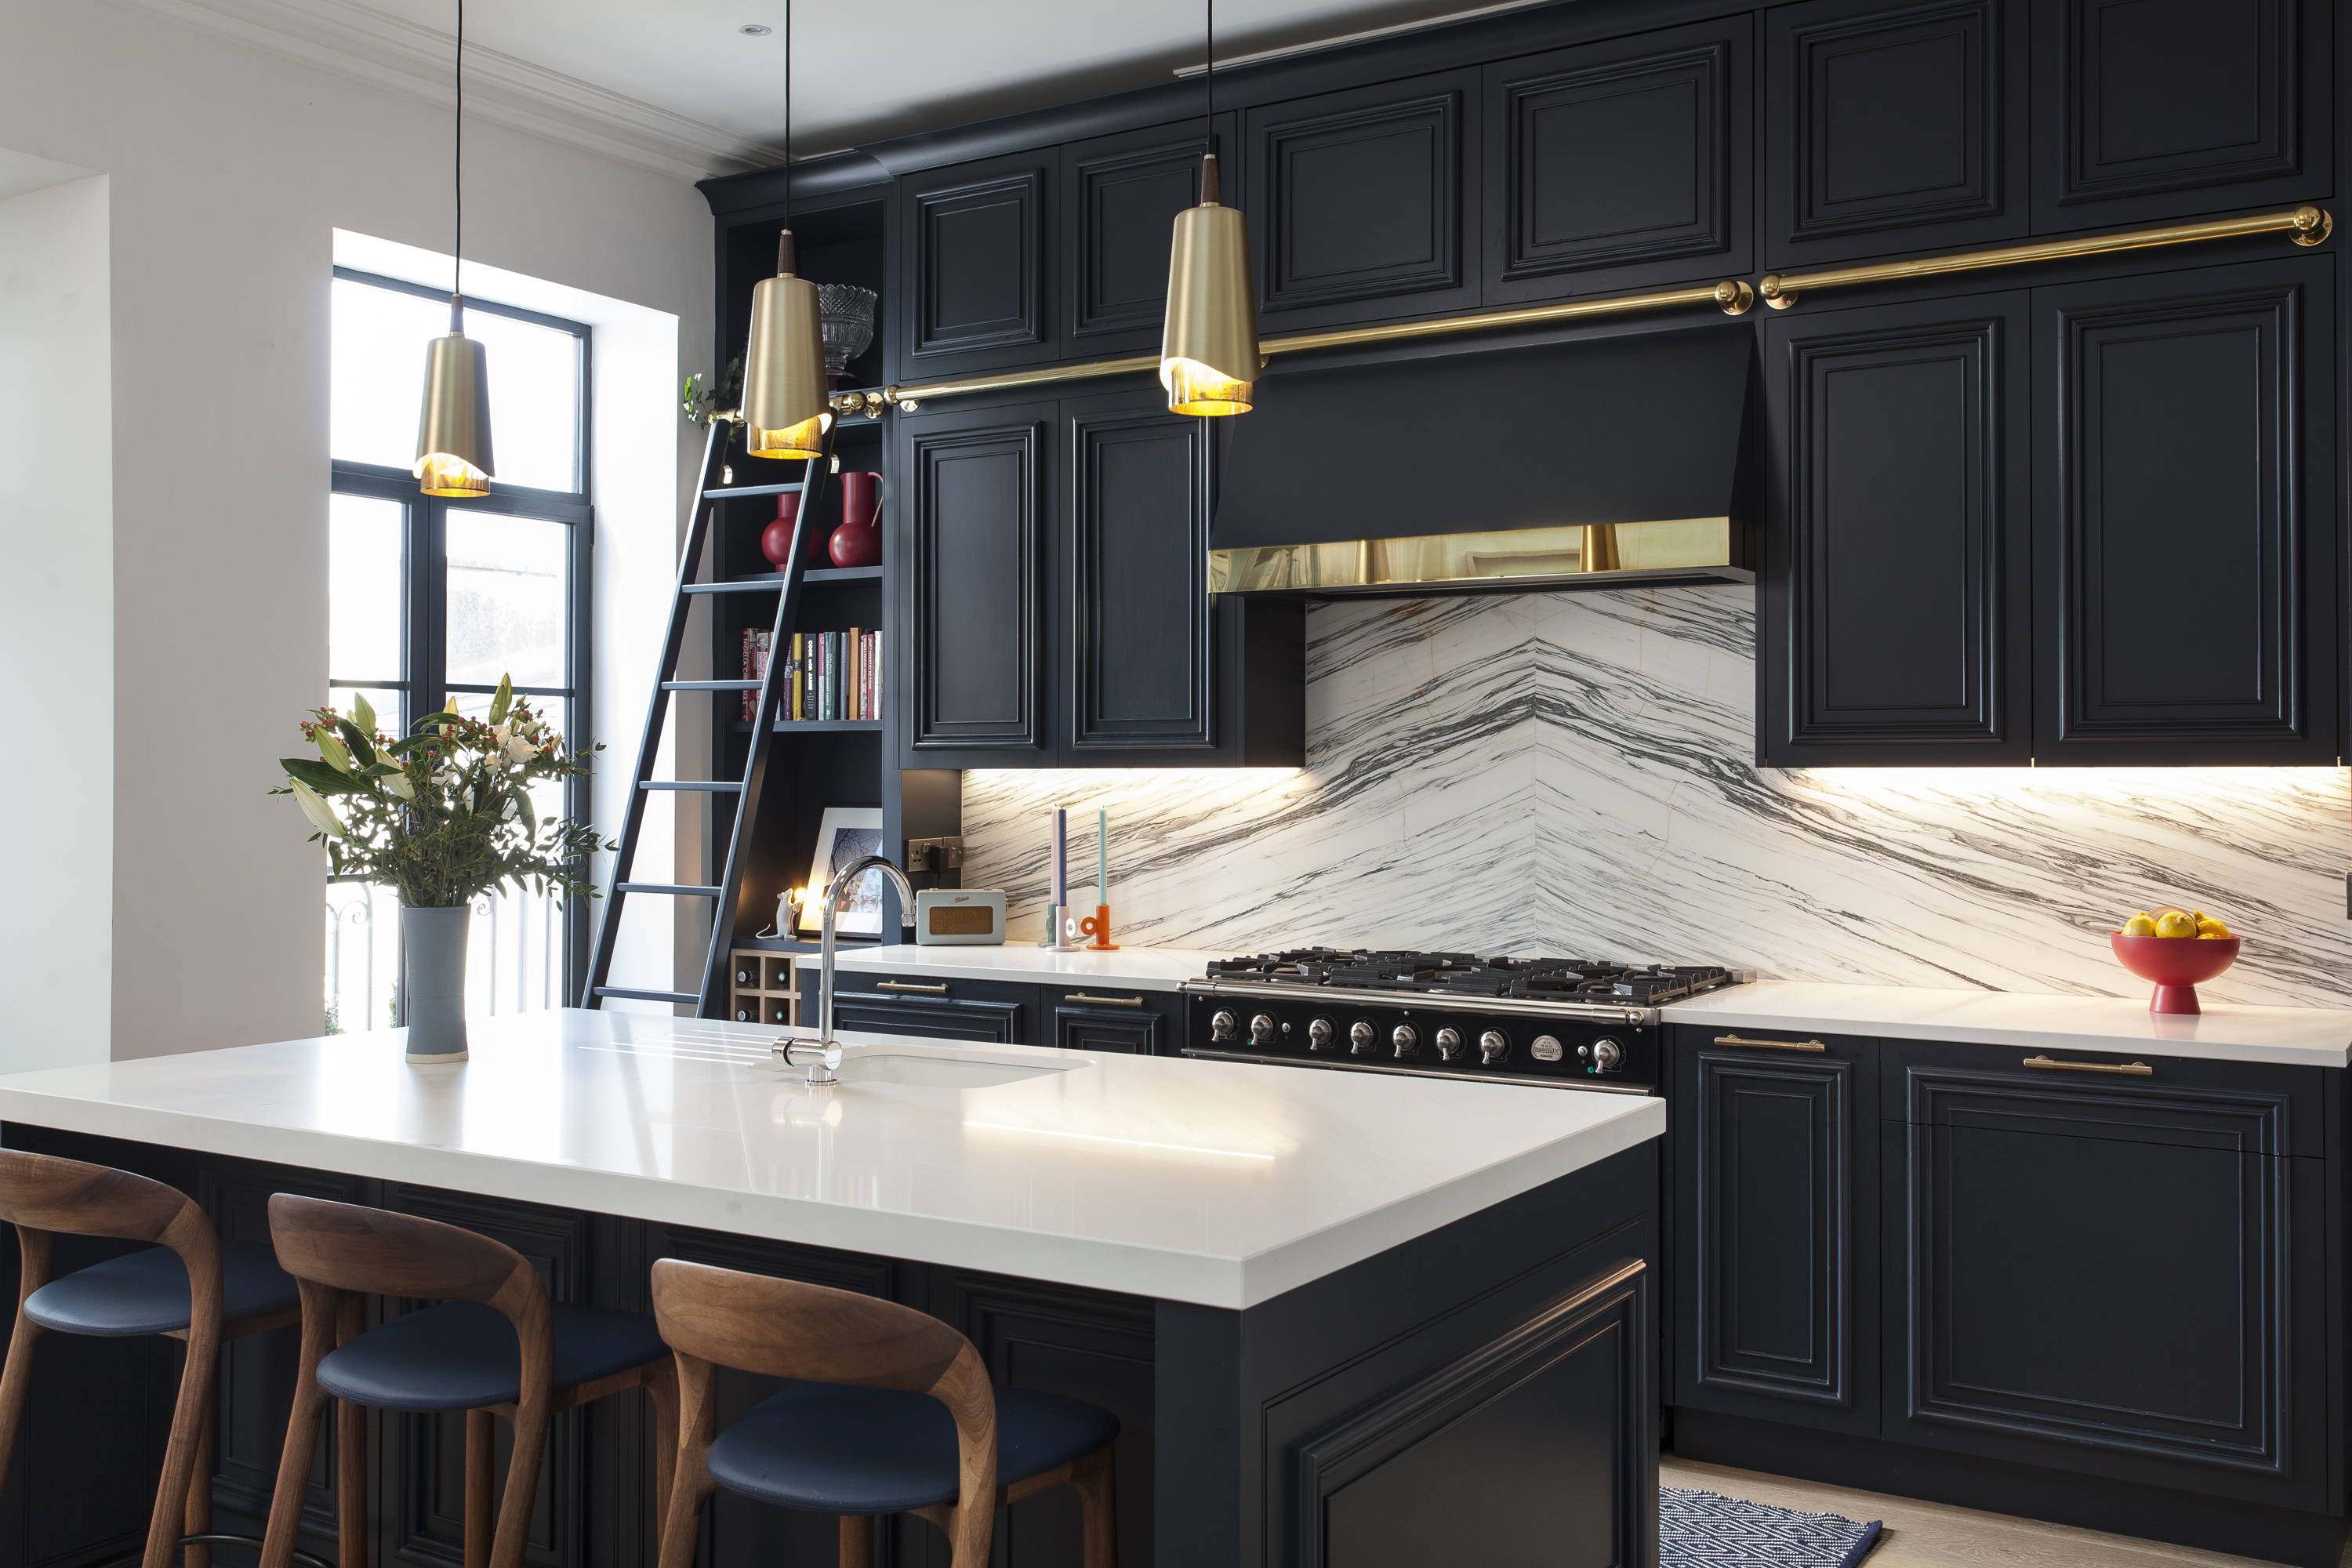 95 Kitchen Ideas to Transform Your Space